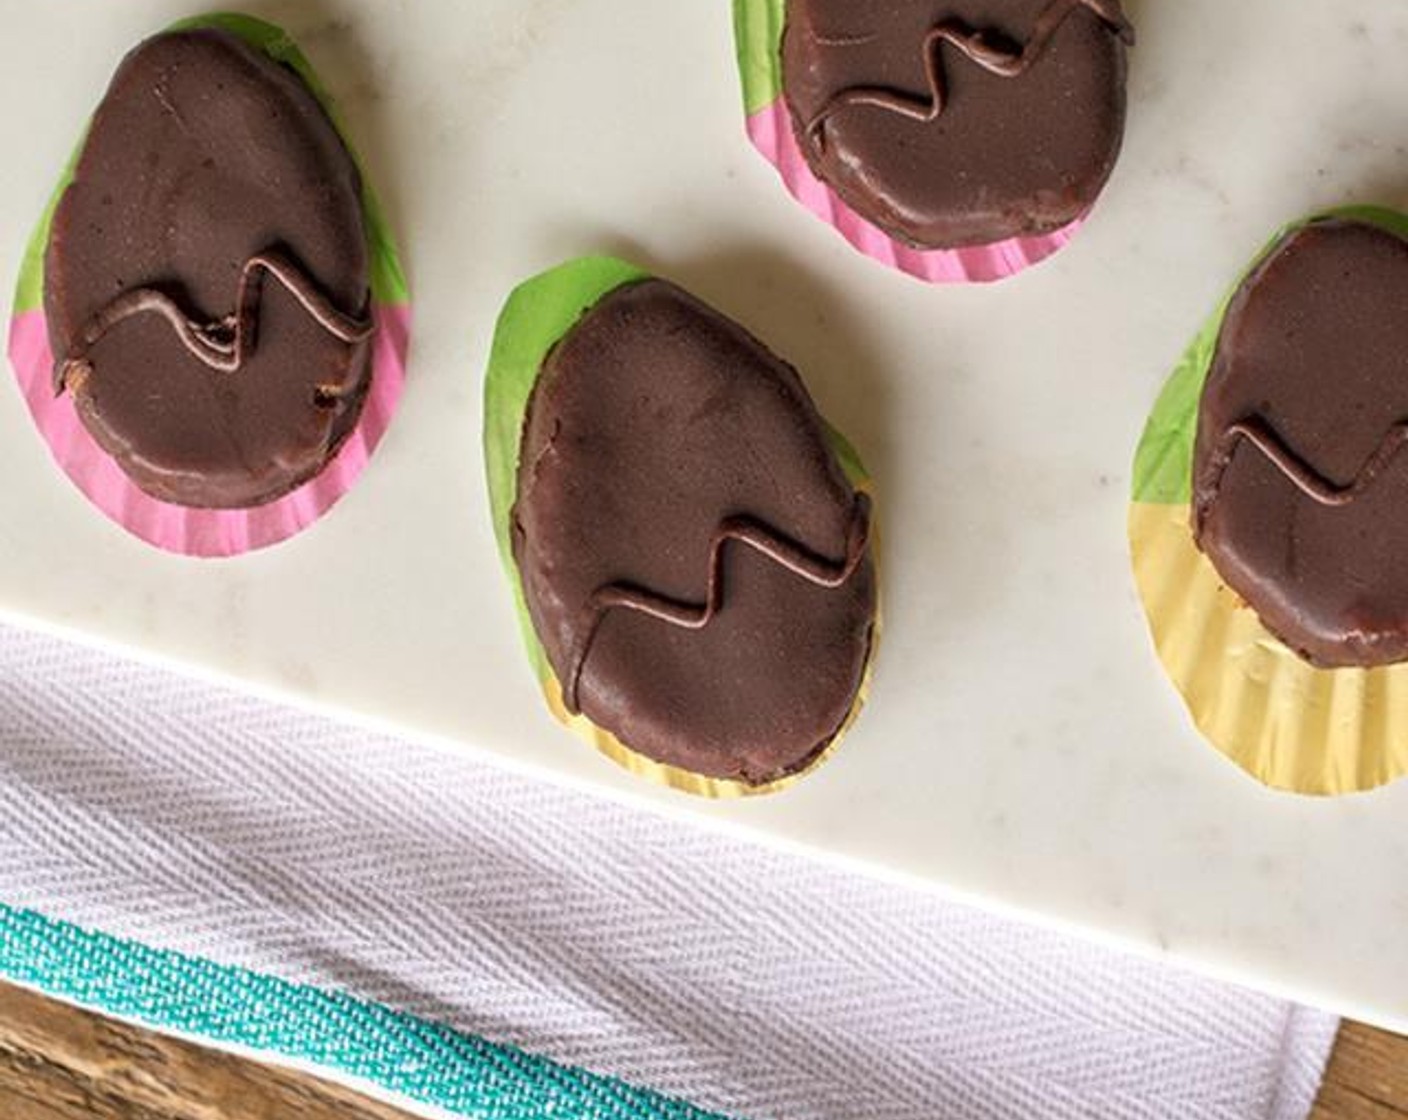 Clean Eating "Reese's" Peanut Butter Eggs